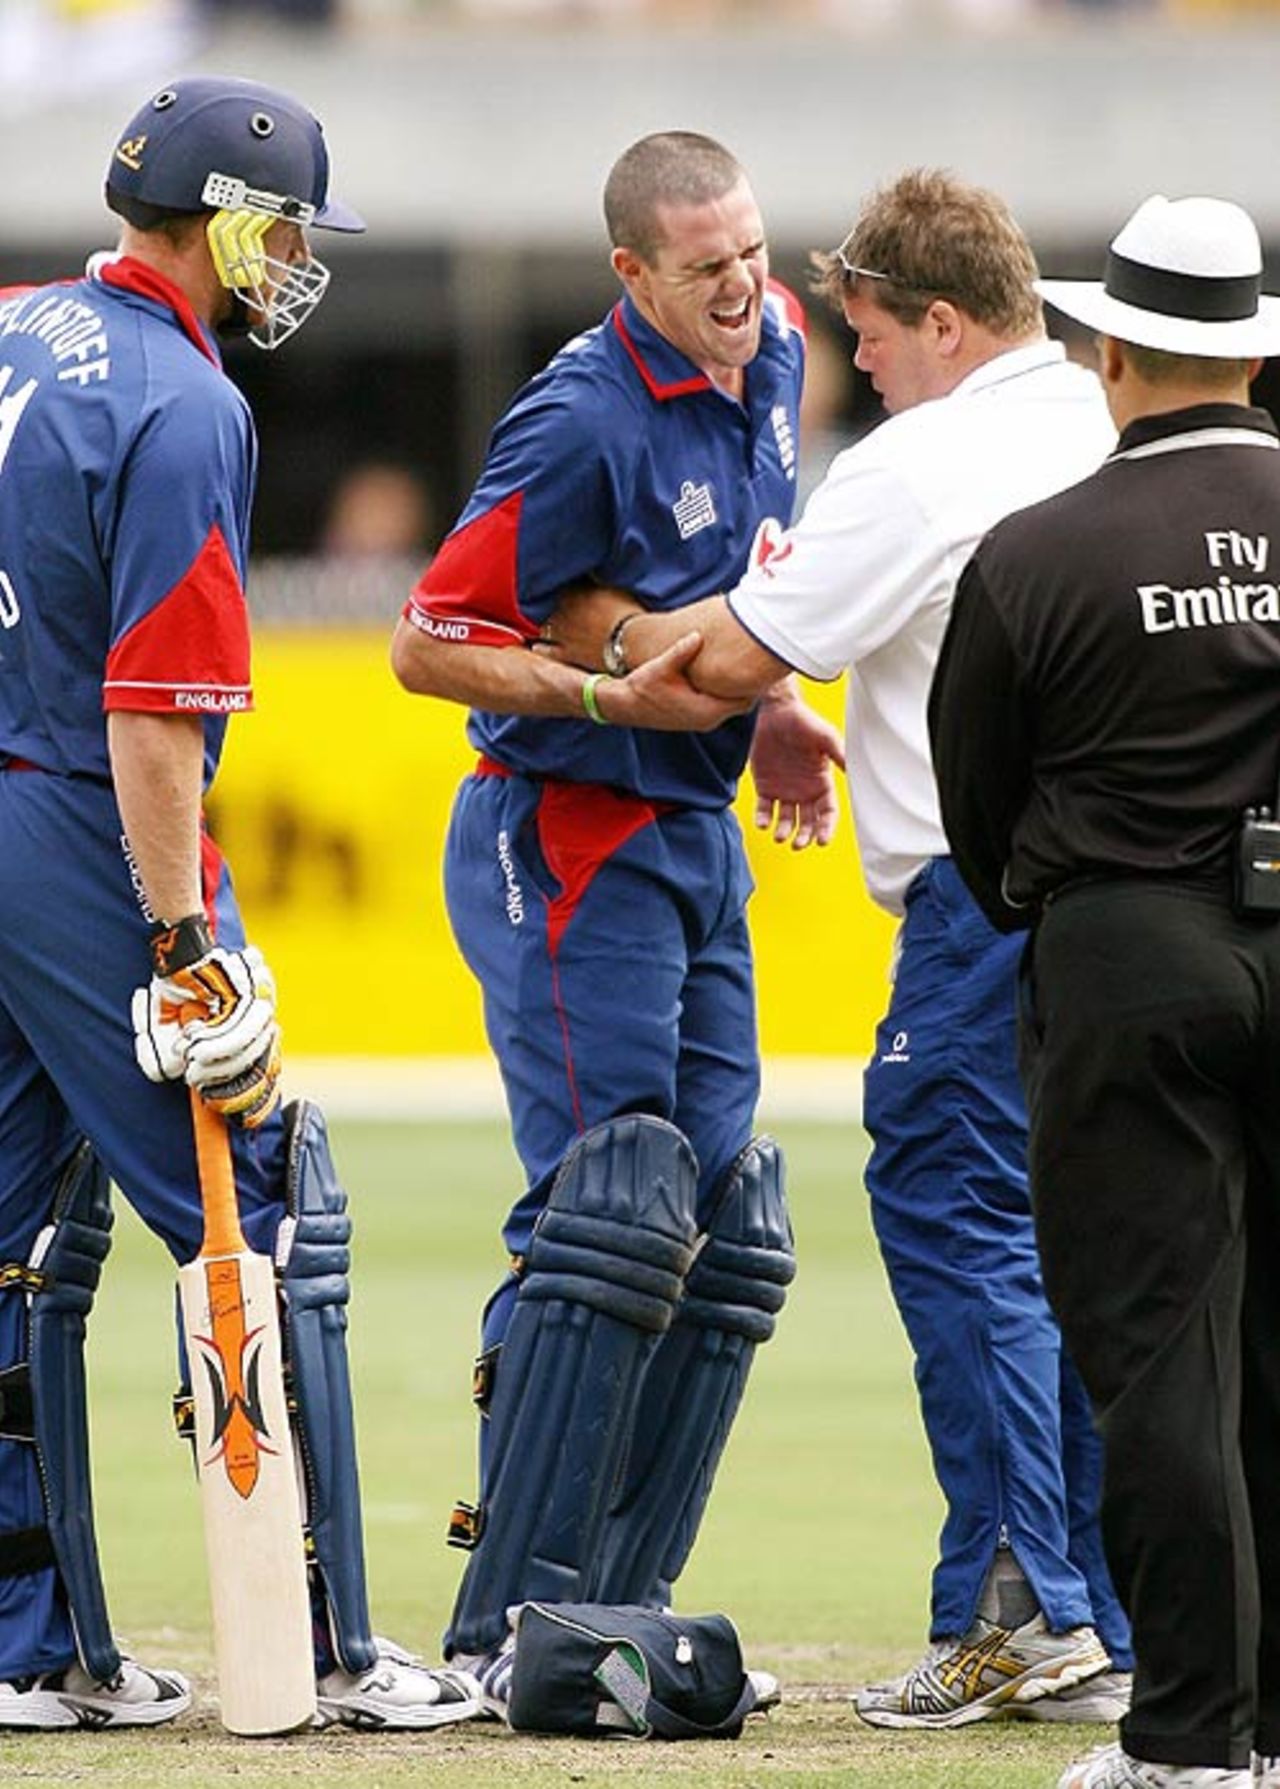 The physio attends to Kevin Pietersen's rib cage, Australia v England, Commonwealth Bank Series, 1st Match, Melbourne, January 12, 2007